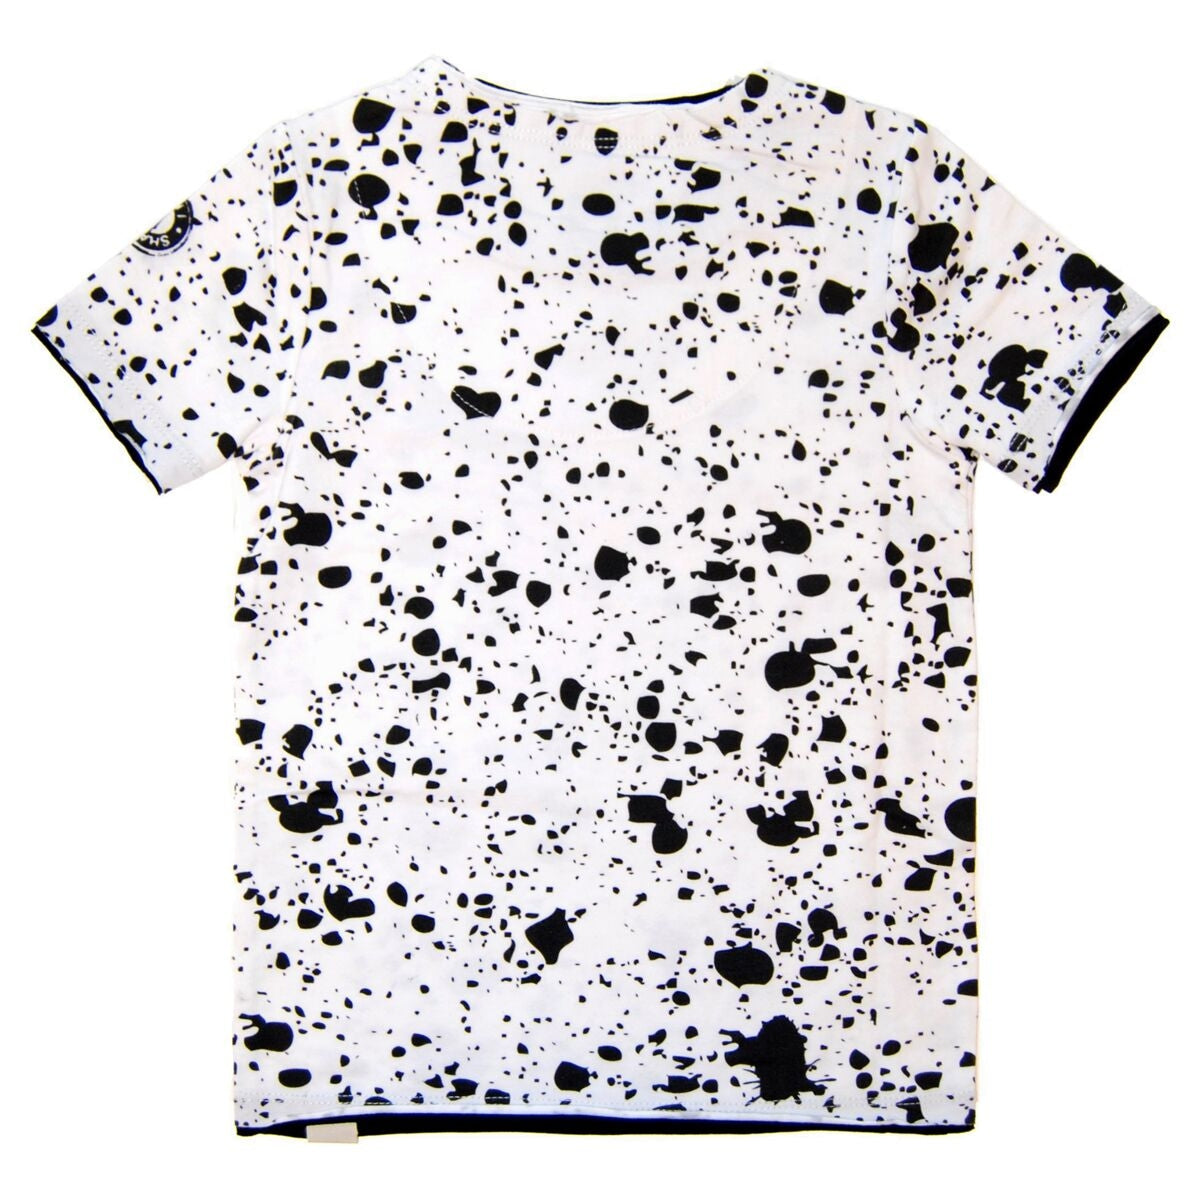 outer space splatter tee